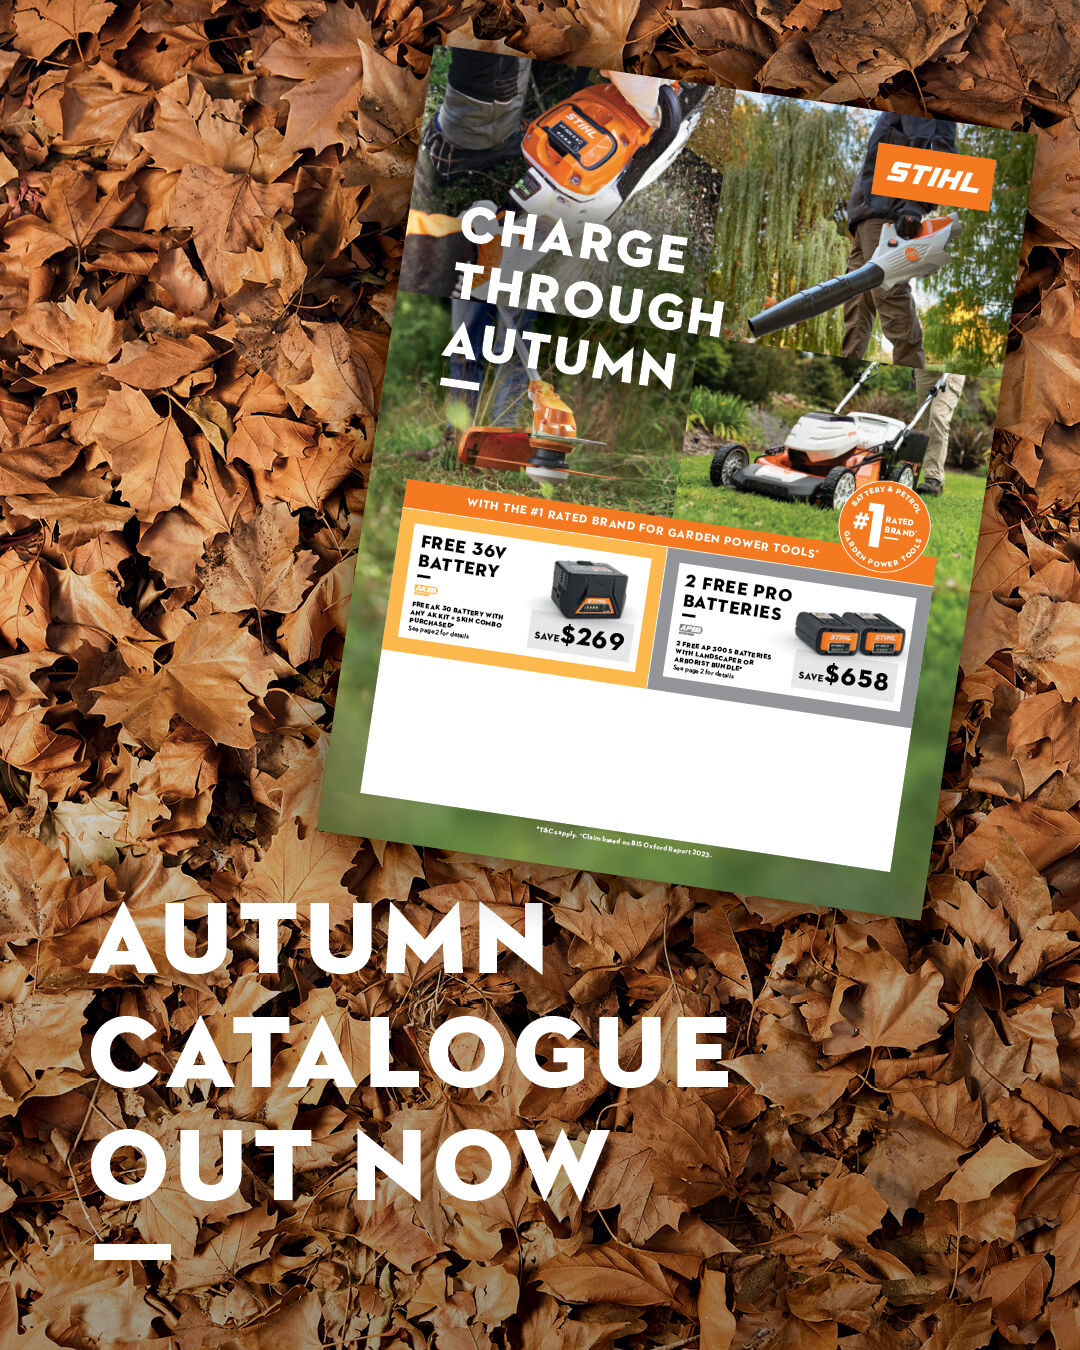 All About Mowers + Chainsaws - Stihl AUTUMN Catalogue